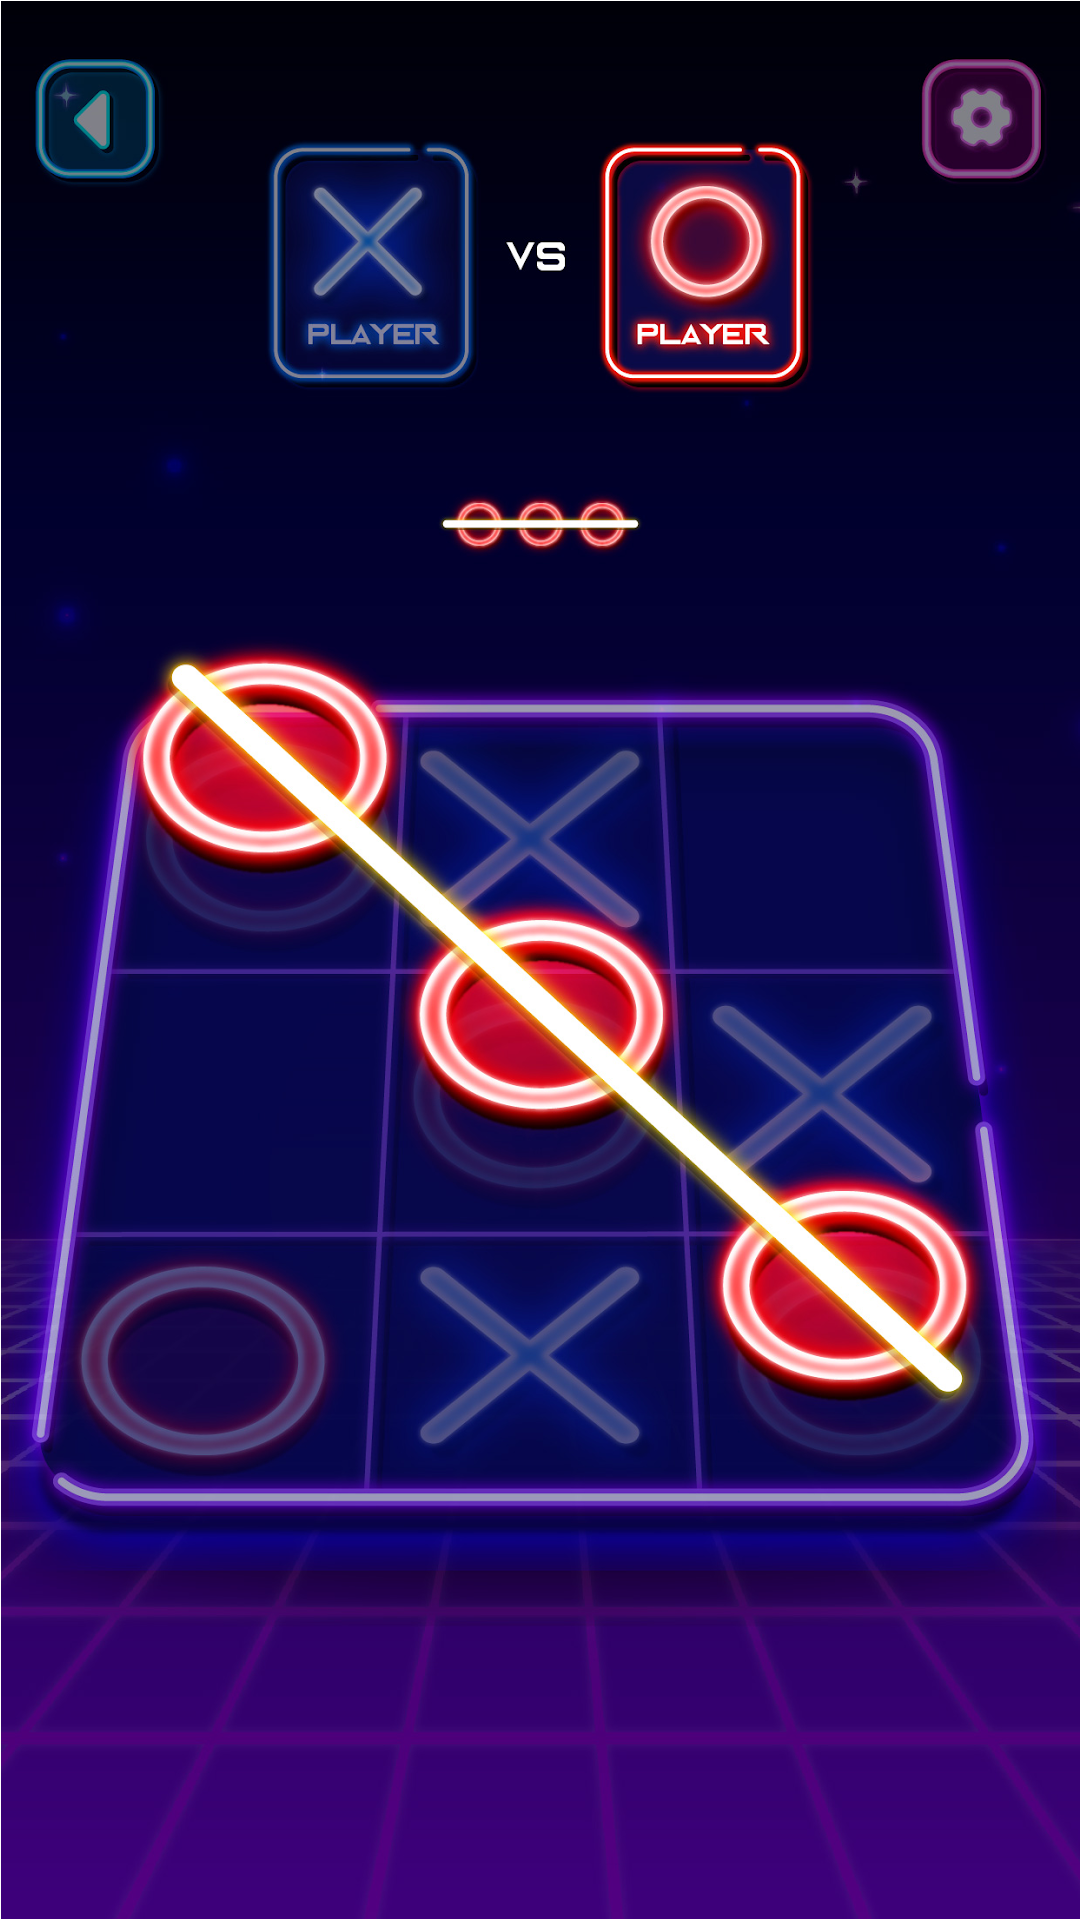 Tic Tac Toe Glow - 2 player classic puzzle game by Vanida Muengtha